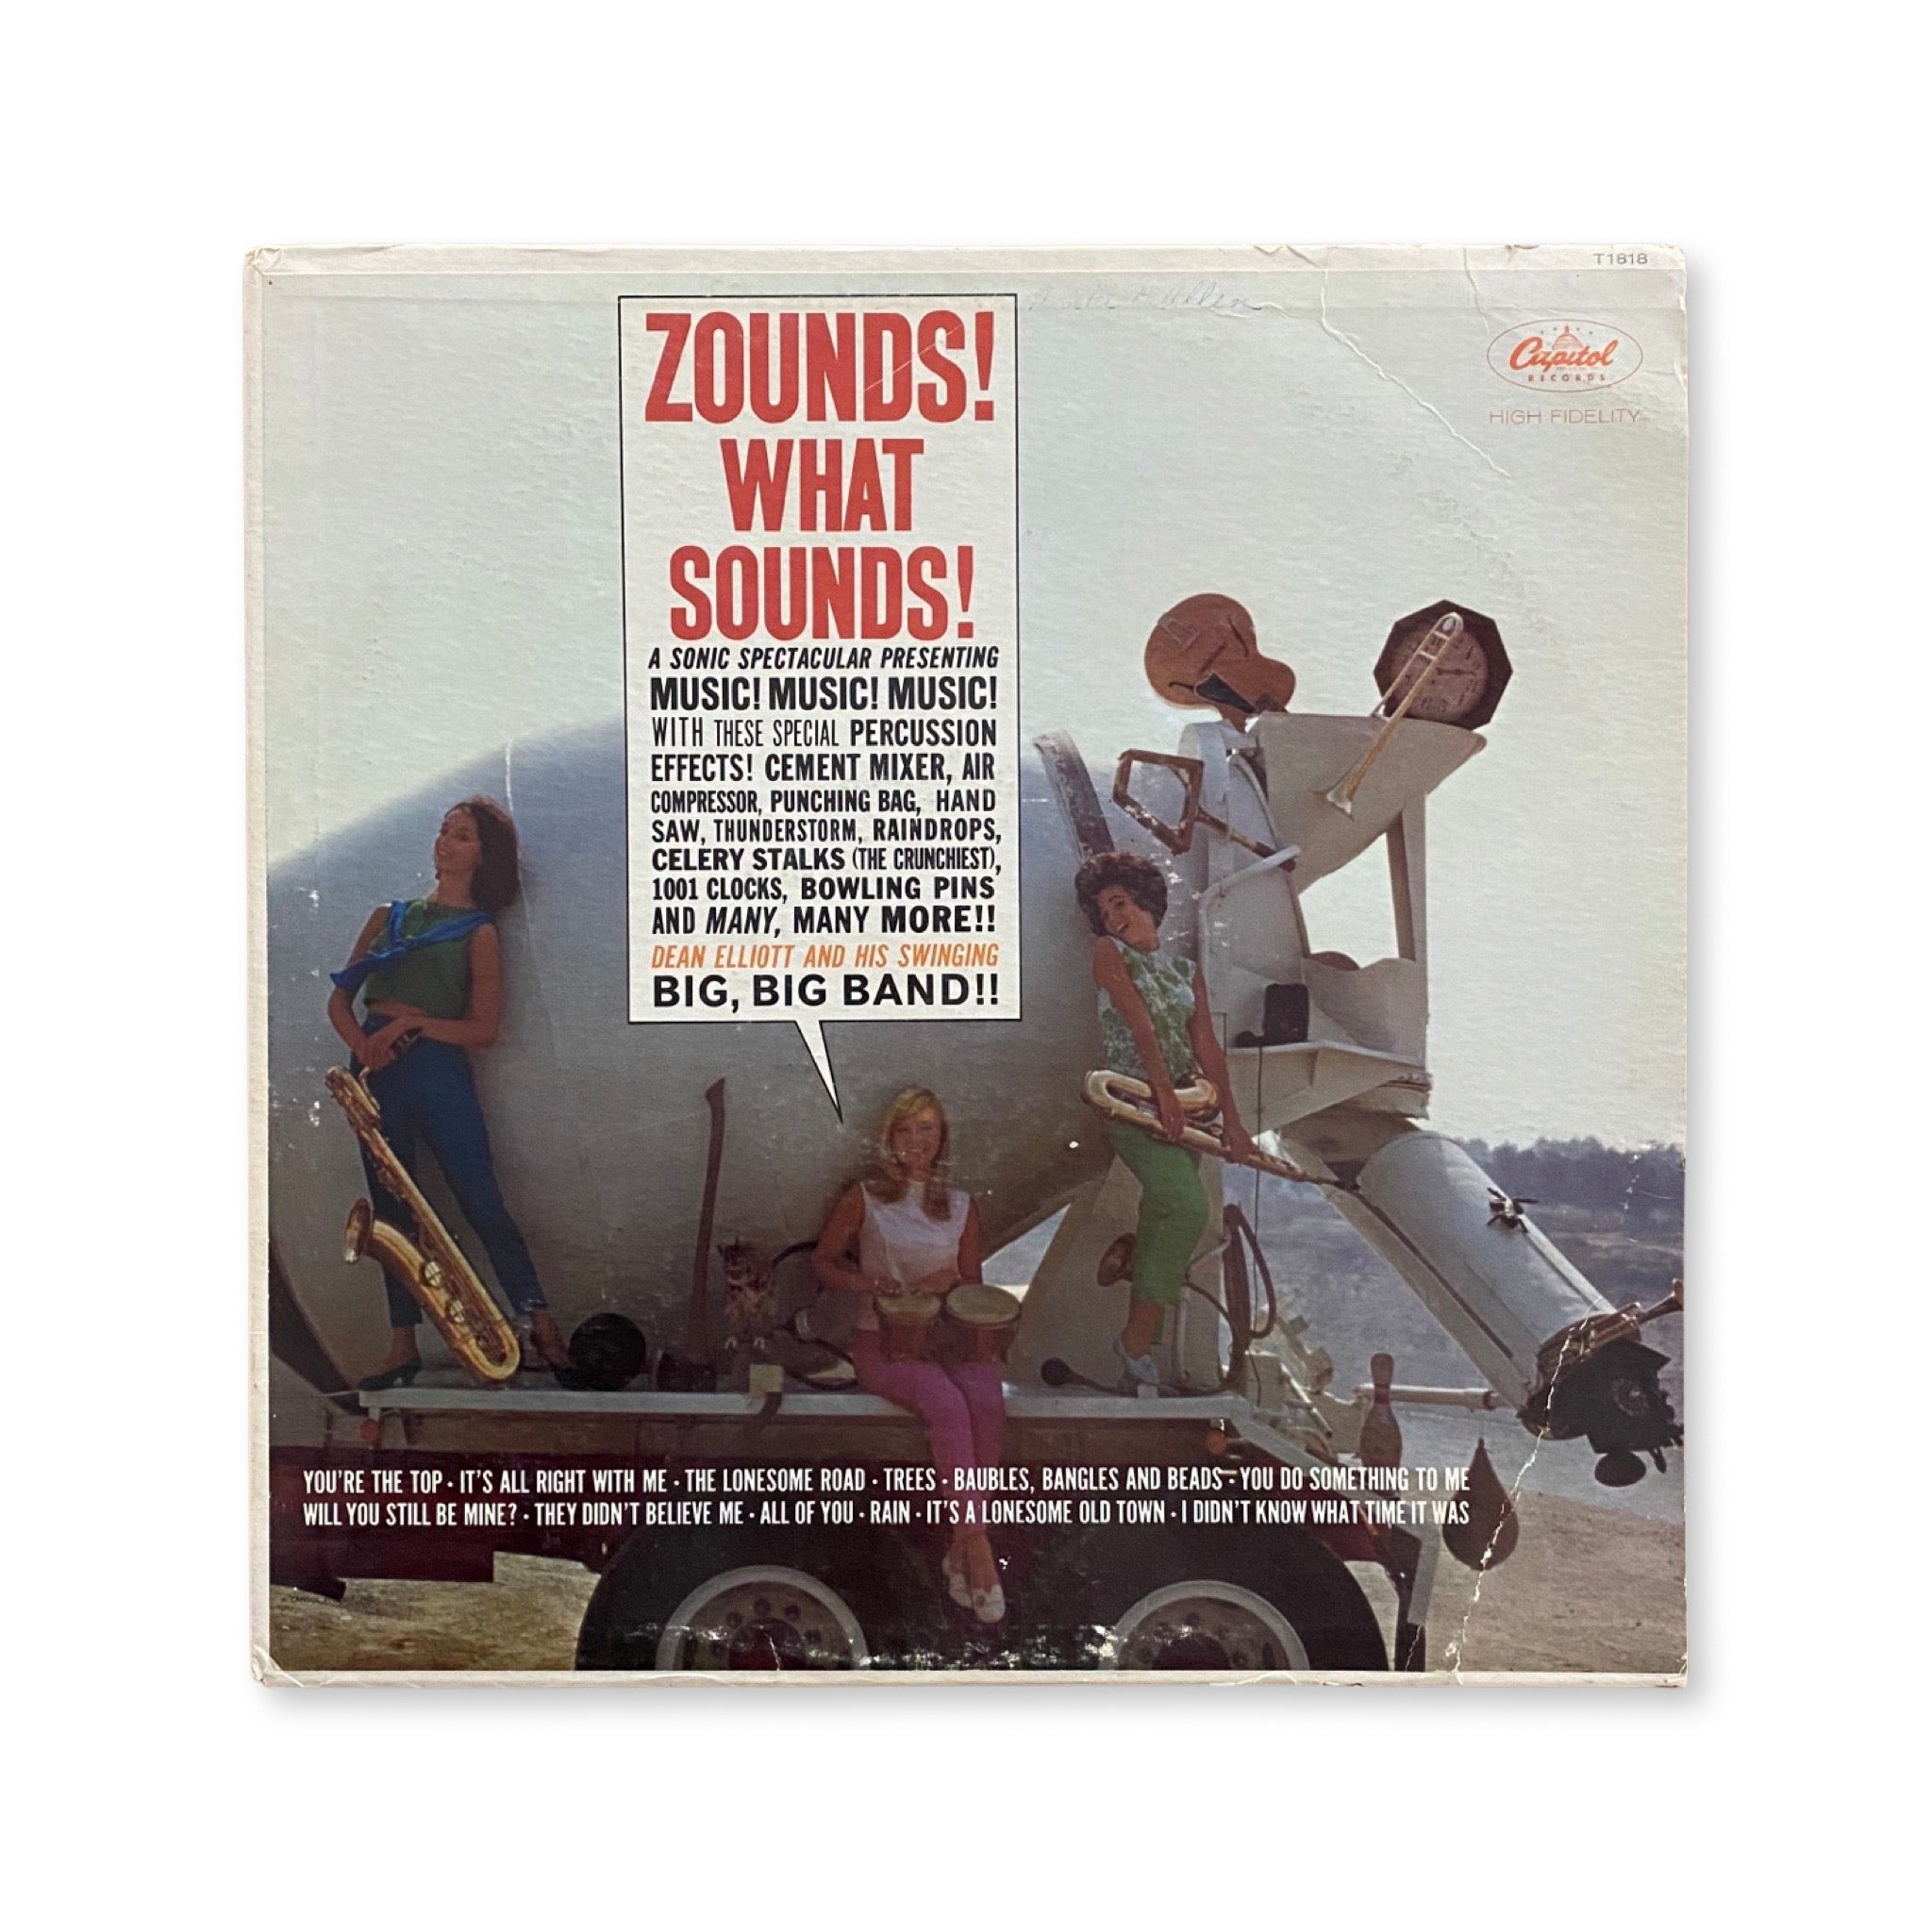 Dean Elliott & His Big Band - Zounds! What Sounds! – Turntable Revival